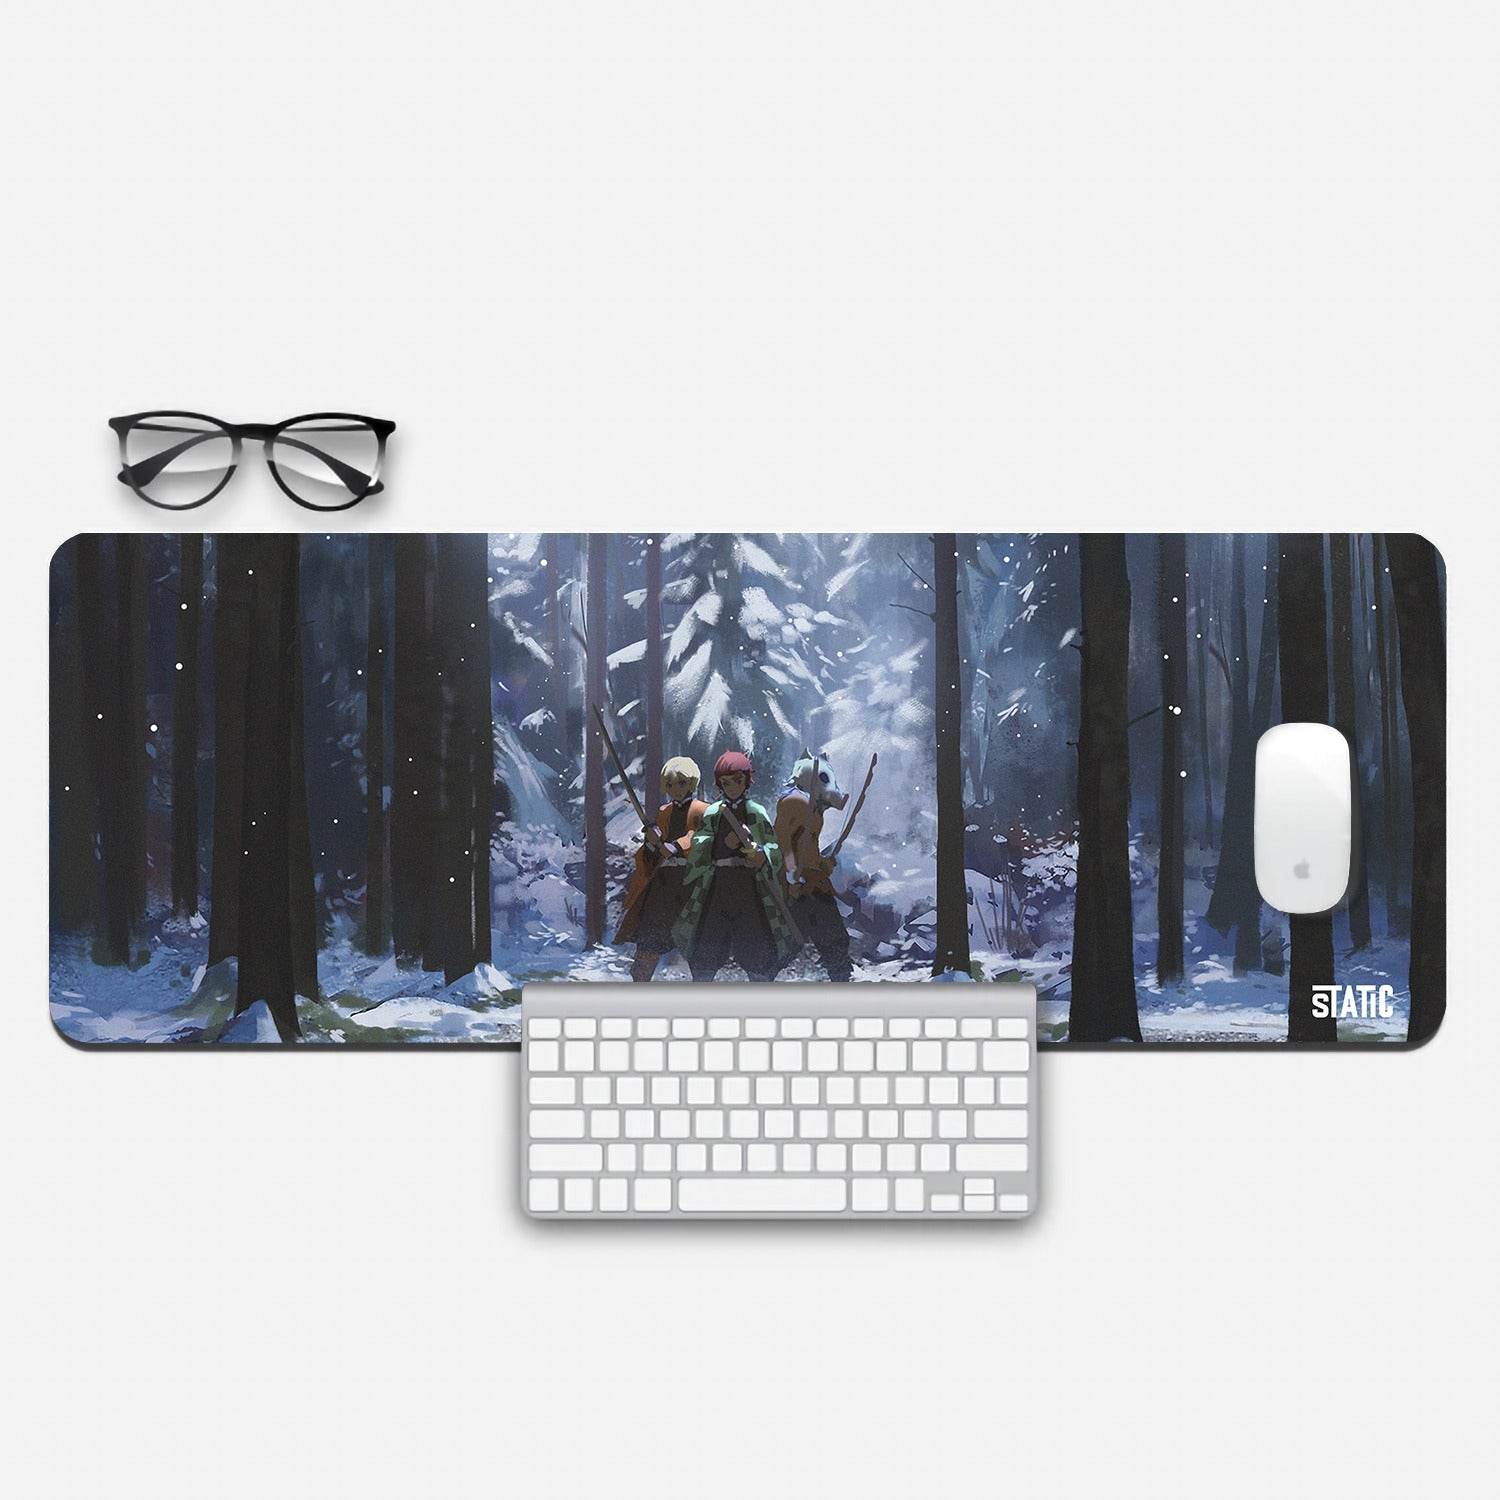 Enhance your gaming prowess with our Extended Gaming Mouse Pad featuring Zenitsu, Tanjiro, and Inosuke from Demon Slayer. In the midst of a snow-covered forest, these heroes stand prepared with their swords drawn. This spacious mouse pad offers precise control, immersing you in the Demon Slayer universe. Elevate your gaming setup and dive into epic battles with your favorite characters. Upgrade your gear and experience thrilling demon-slaying adventures!